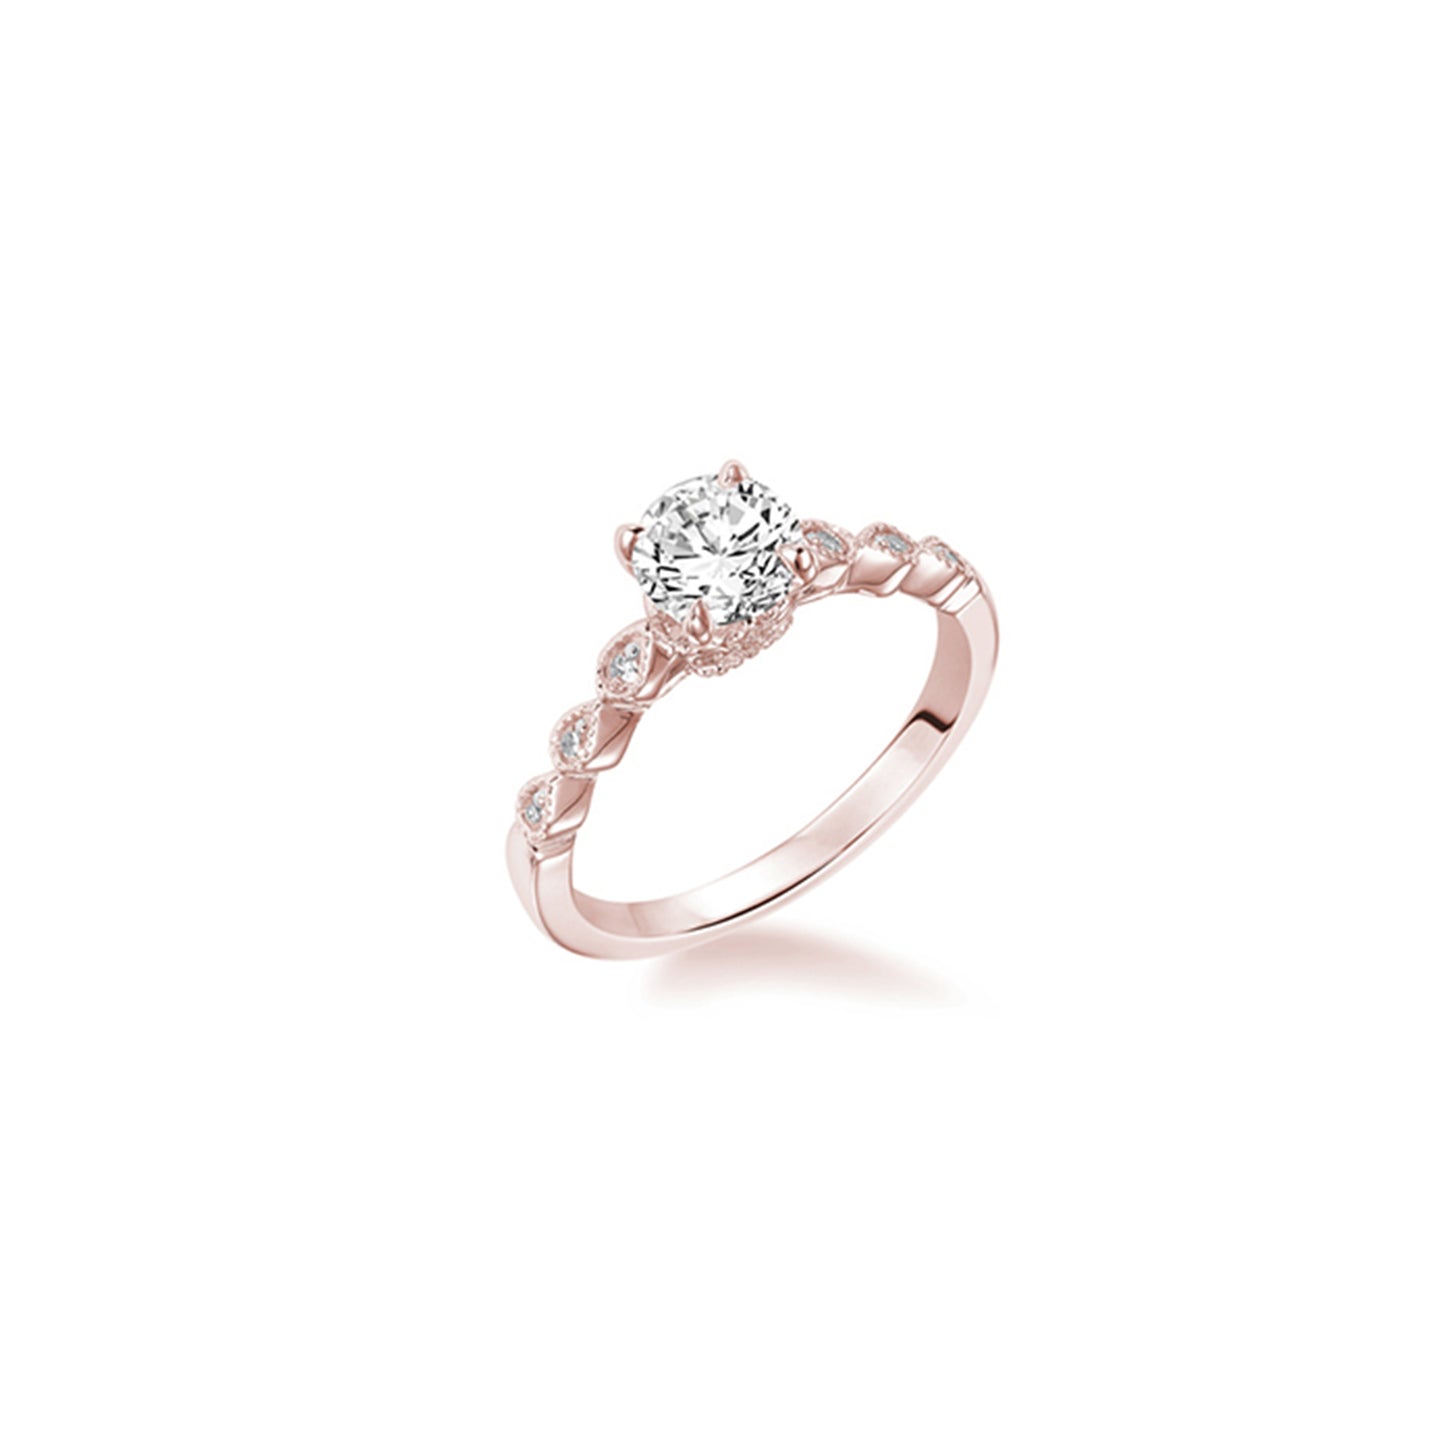 Fink's Exclusive 14K Rose Gold Round Diamond Engagement Ring with a Teardrop Shape Design Shank